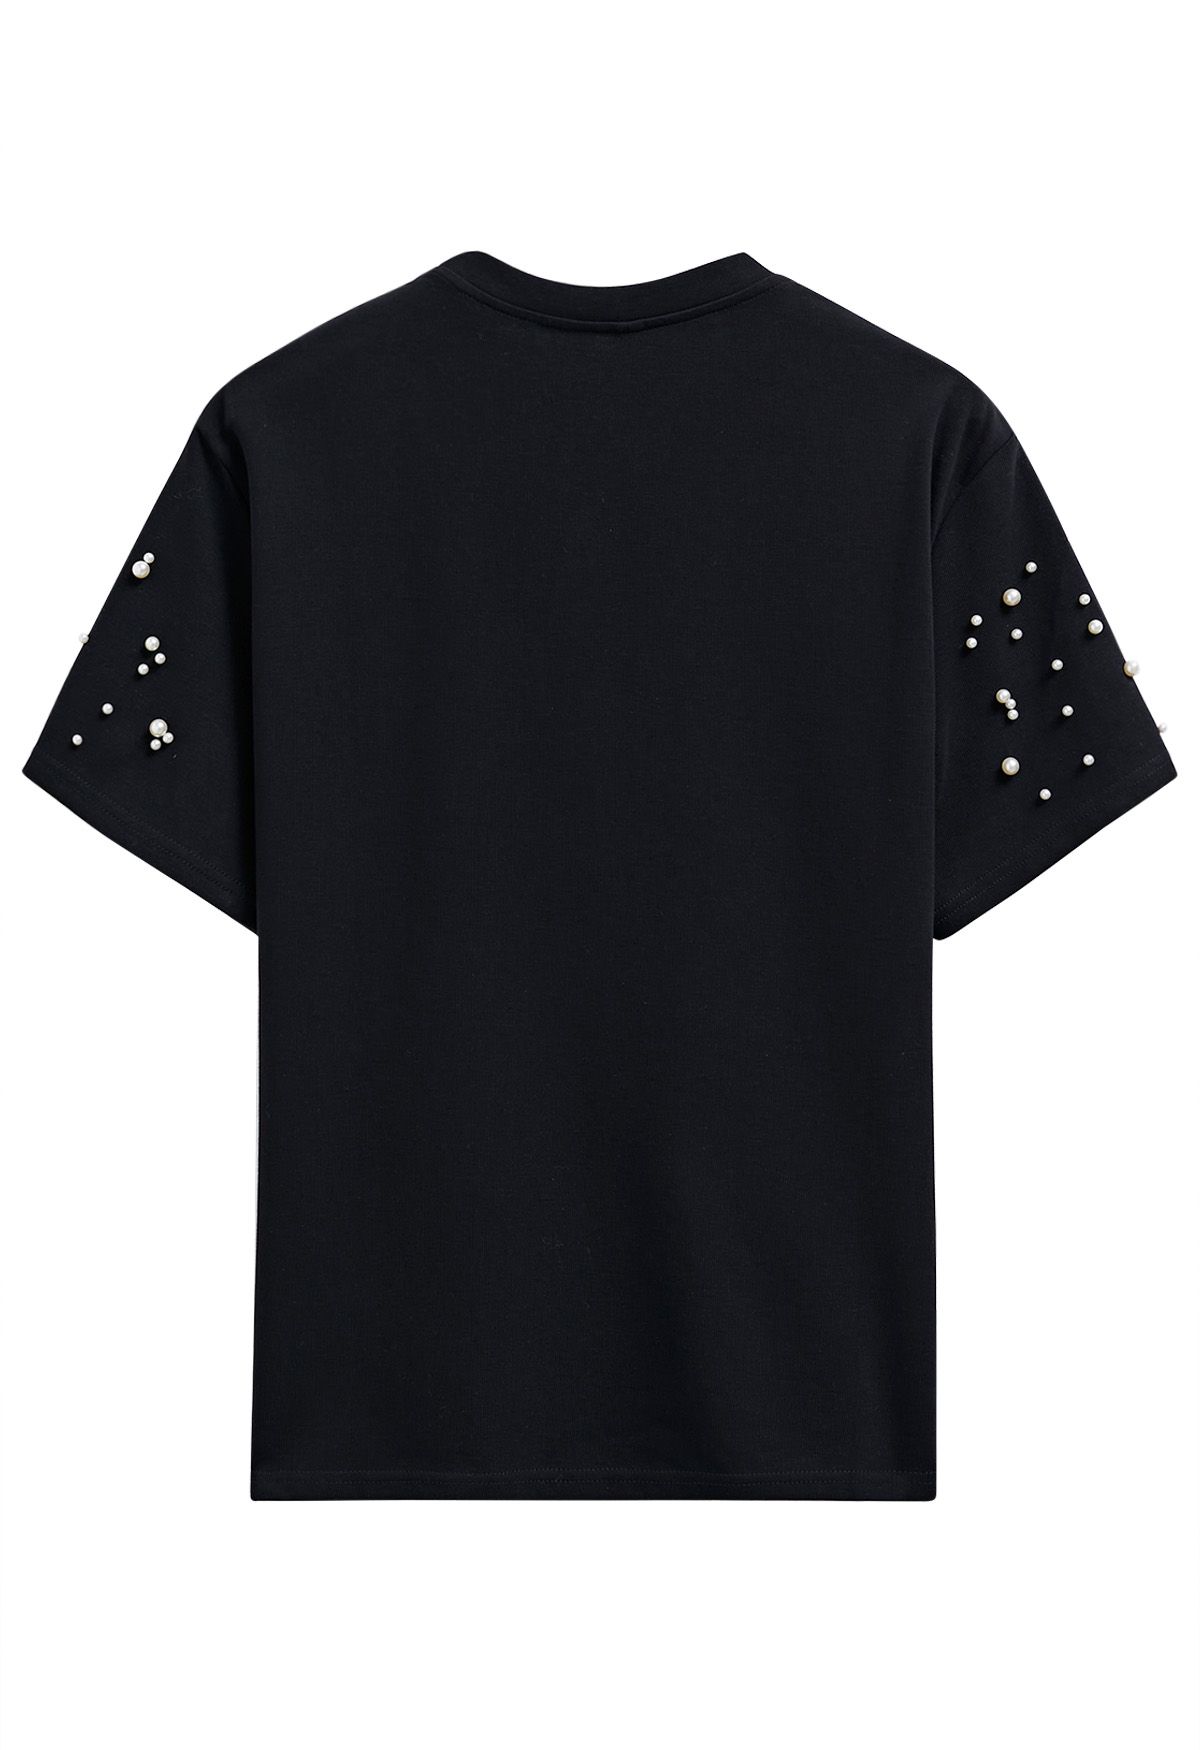 Sophisticated Pearl Trim T-Shirt in Black